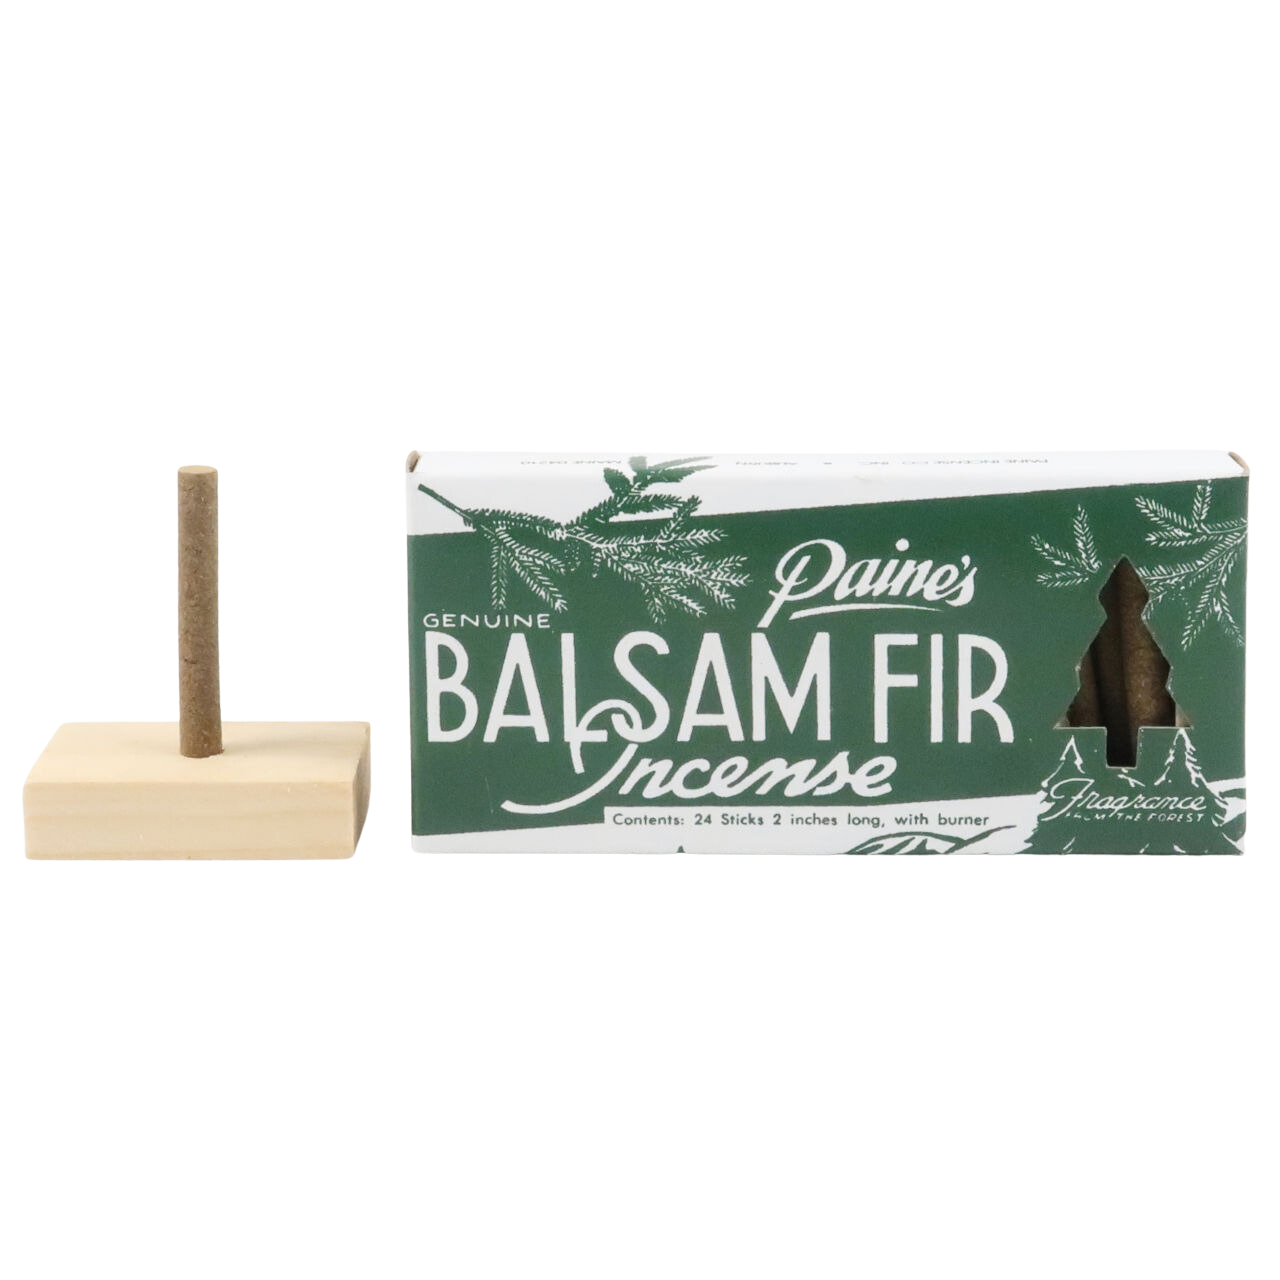 Paine's Balsam Fir Incense Box of 24 Sticks and Holder